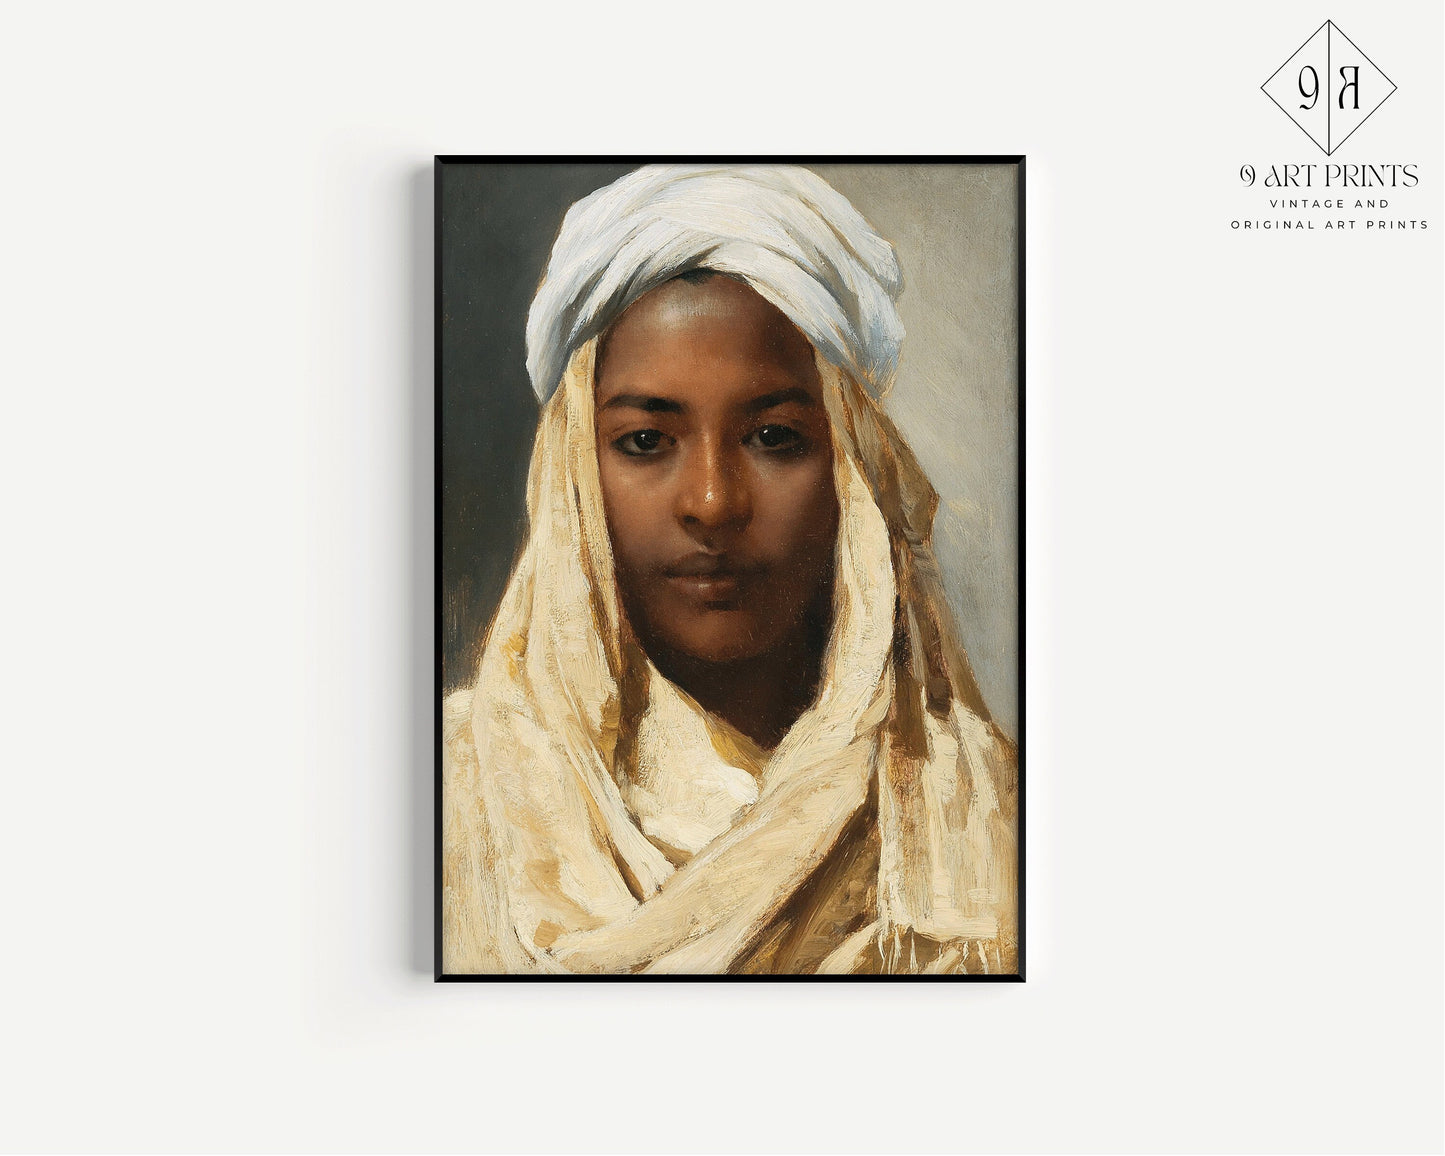 Franz Xaver Kosler Young Bedouin Famous Orientalist Painting Classic Portrait Museum Quality Print Framed Ready to Hang Home Office Decor